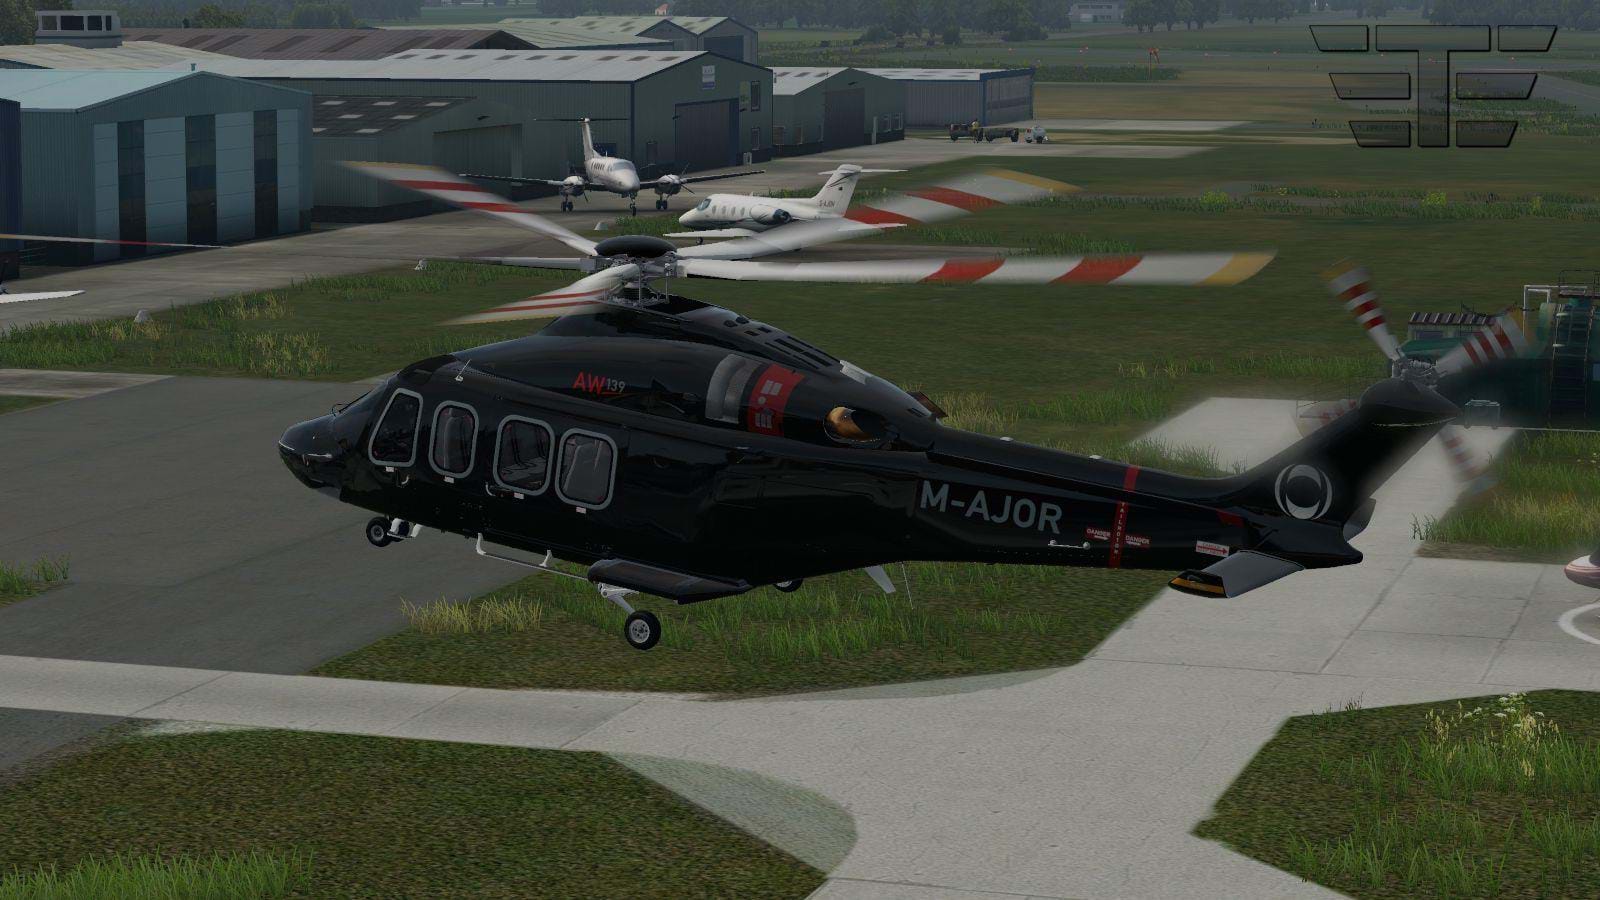 M-AJOR Repaint for the X-Rotors AW139 for X-Plane